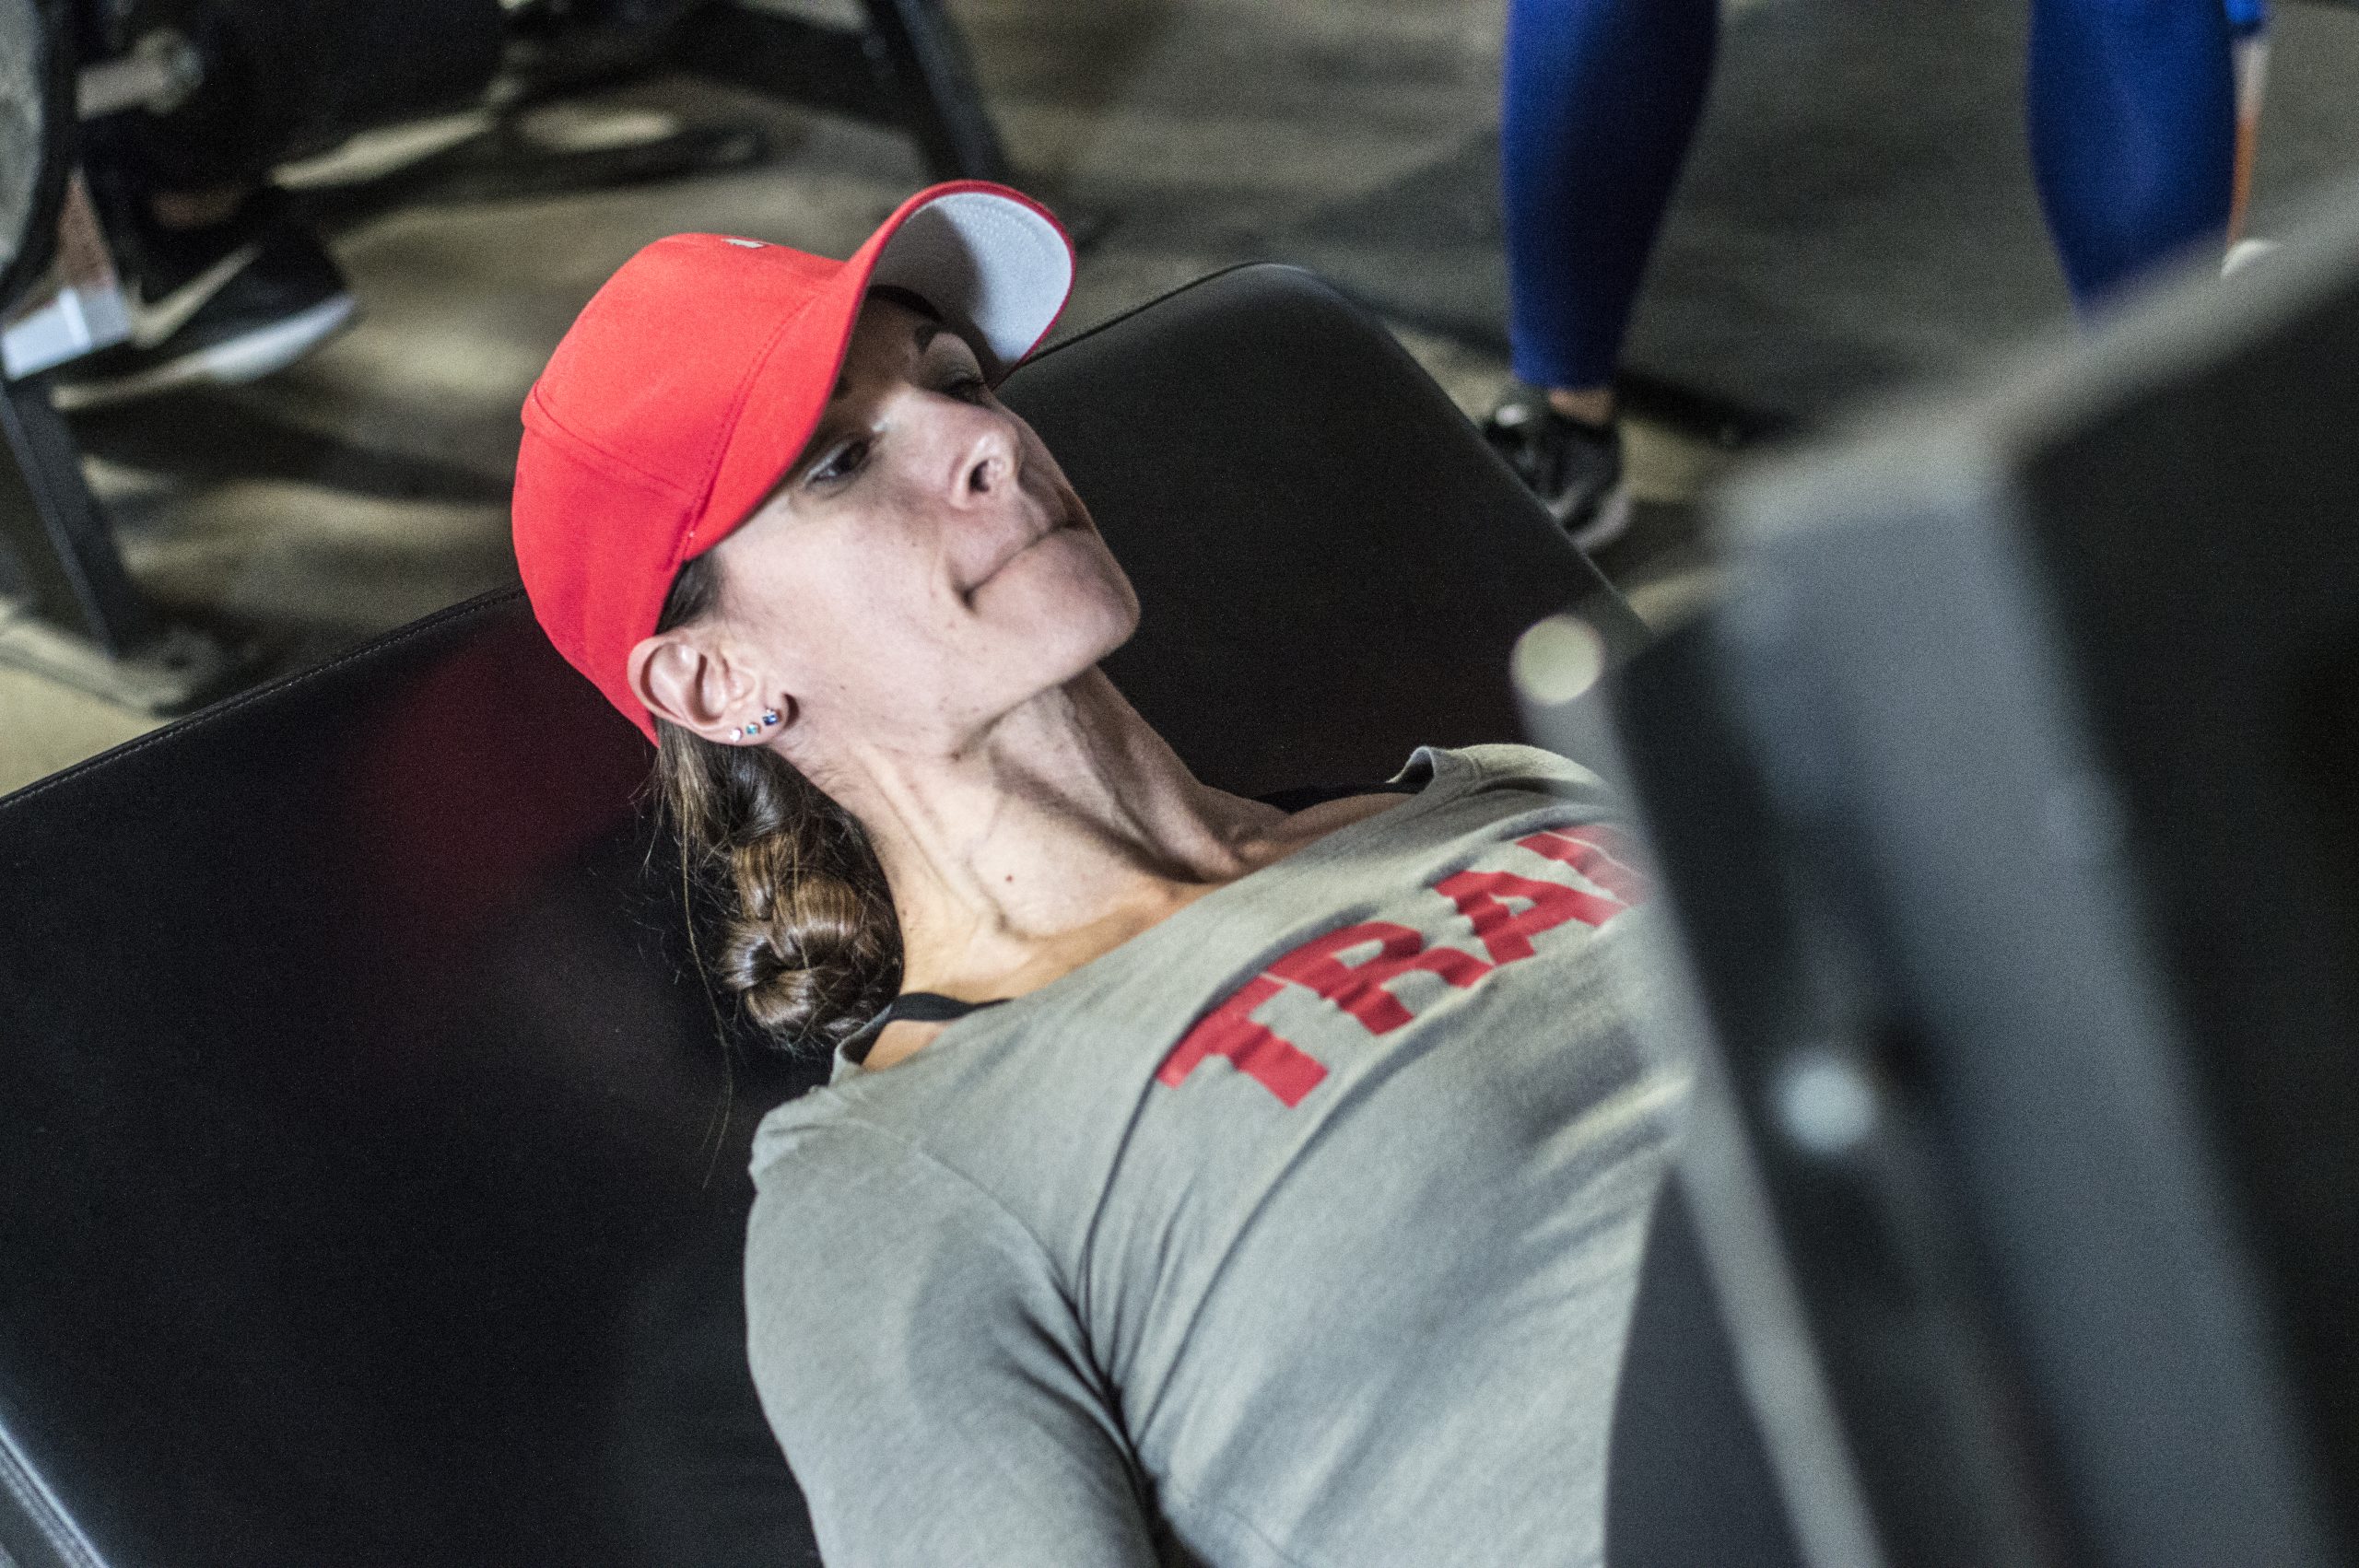 Lat rolling and forearm flossing (videos)